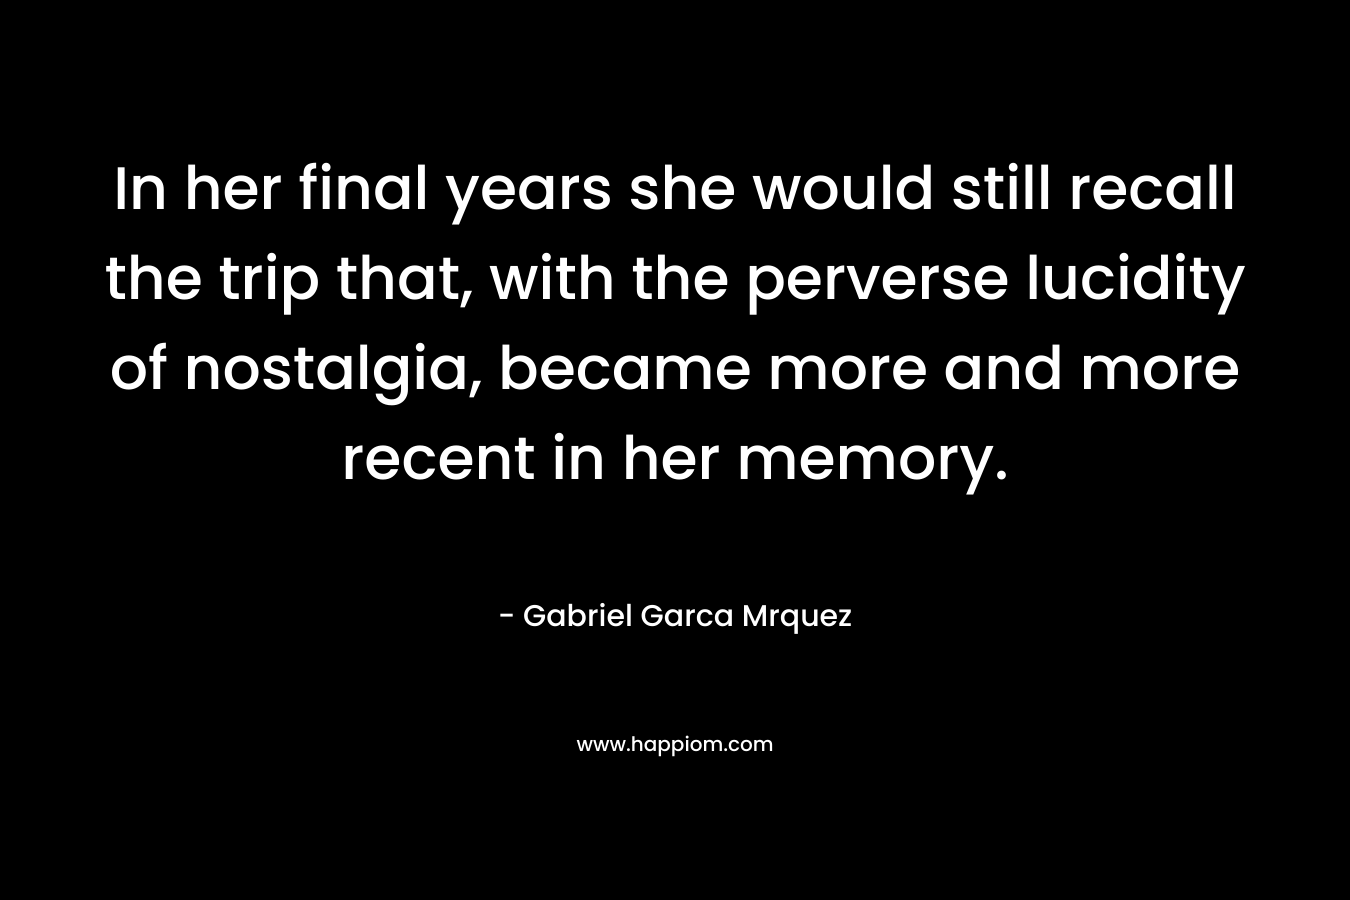 In her final years she would still recall the trip that, with the perverse lucidity of nostalgia, became more and more recent in her memory. – Gabriel Garca Mrquez